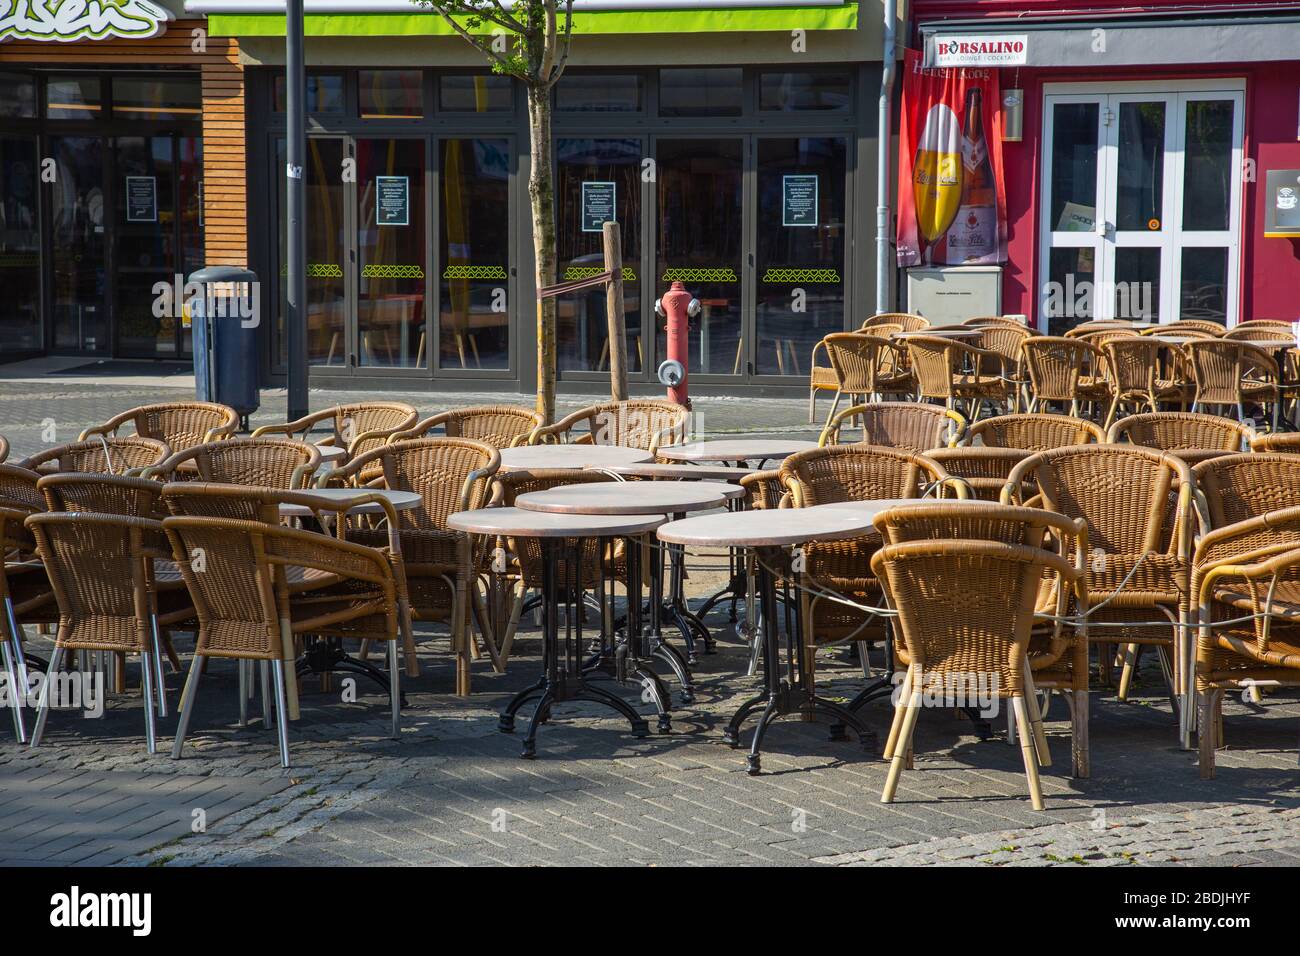 Neuwied, Germany - April 8, 2020: closed pub "Borsalino" with empty chairs  and tables in front based on Corona pandemic Stock Photo - Alamy